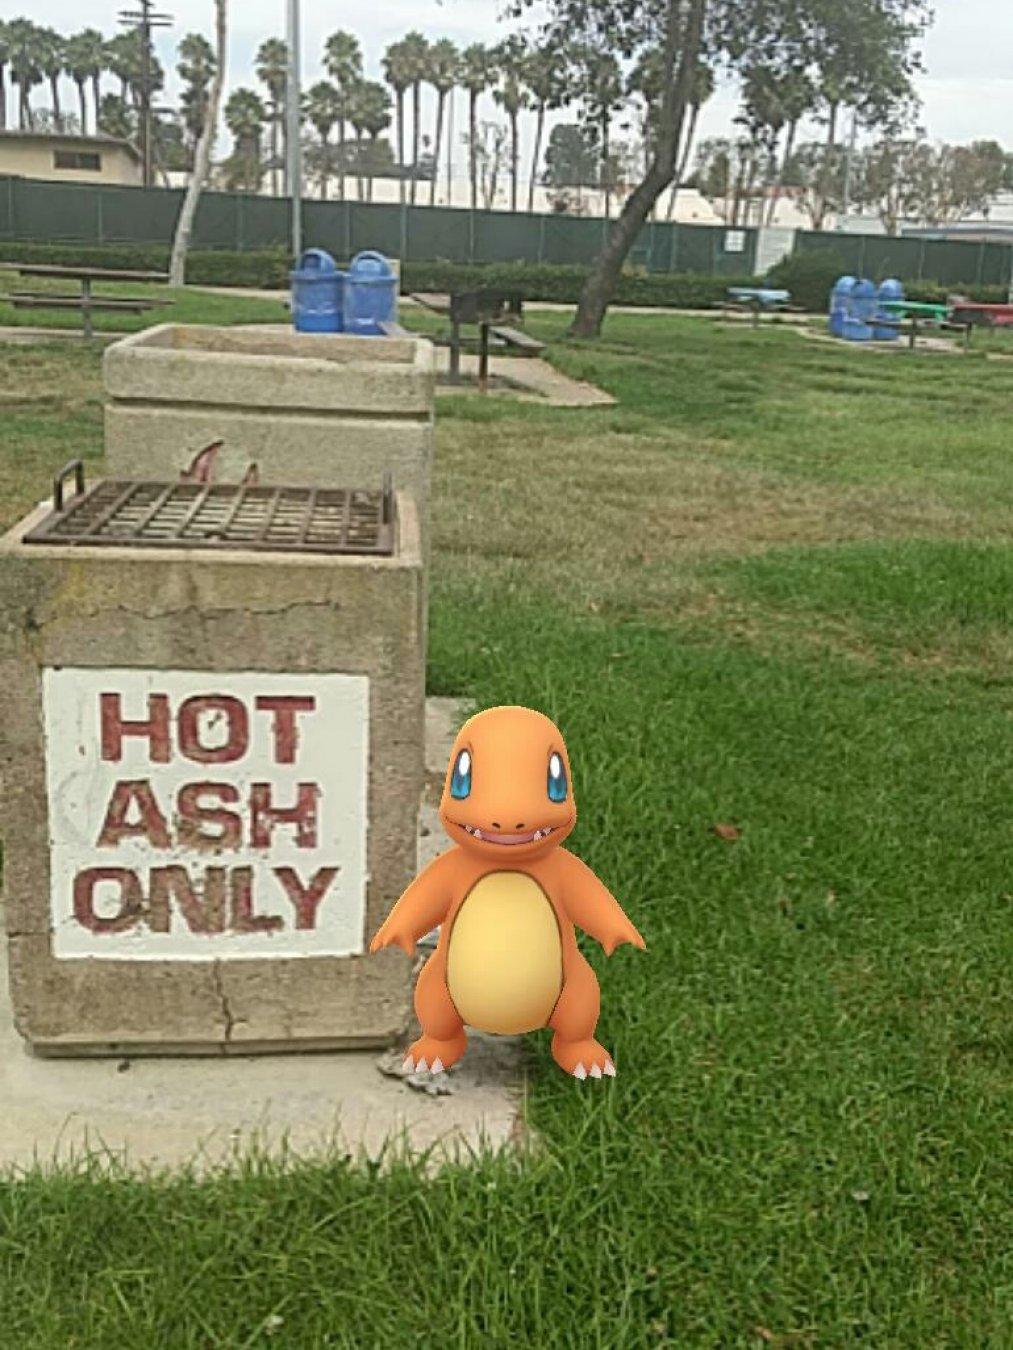 Charmander swore the accident at the #PokemonGo picnic wasn't his fault!